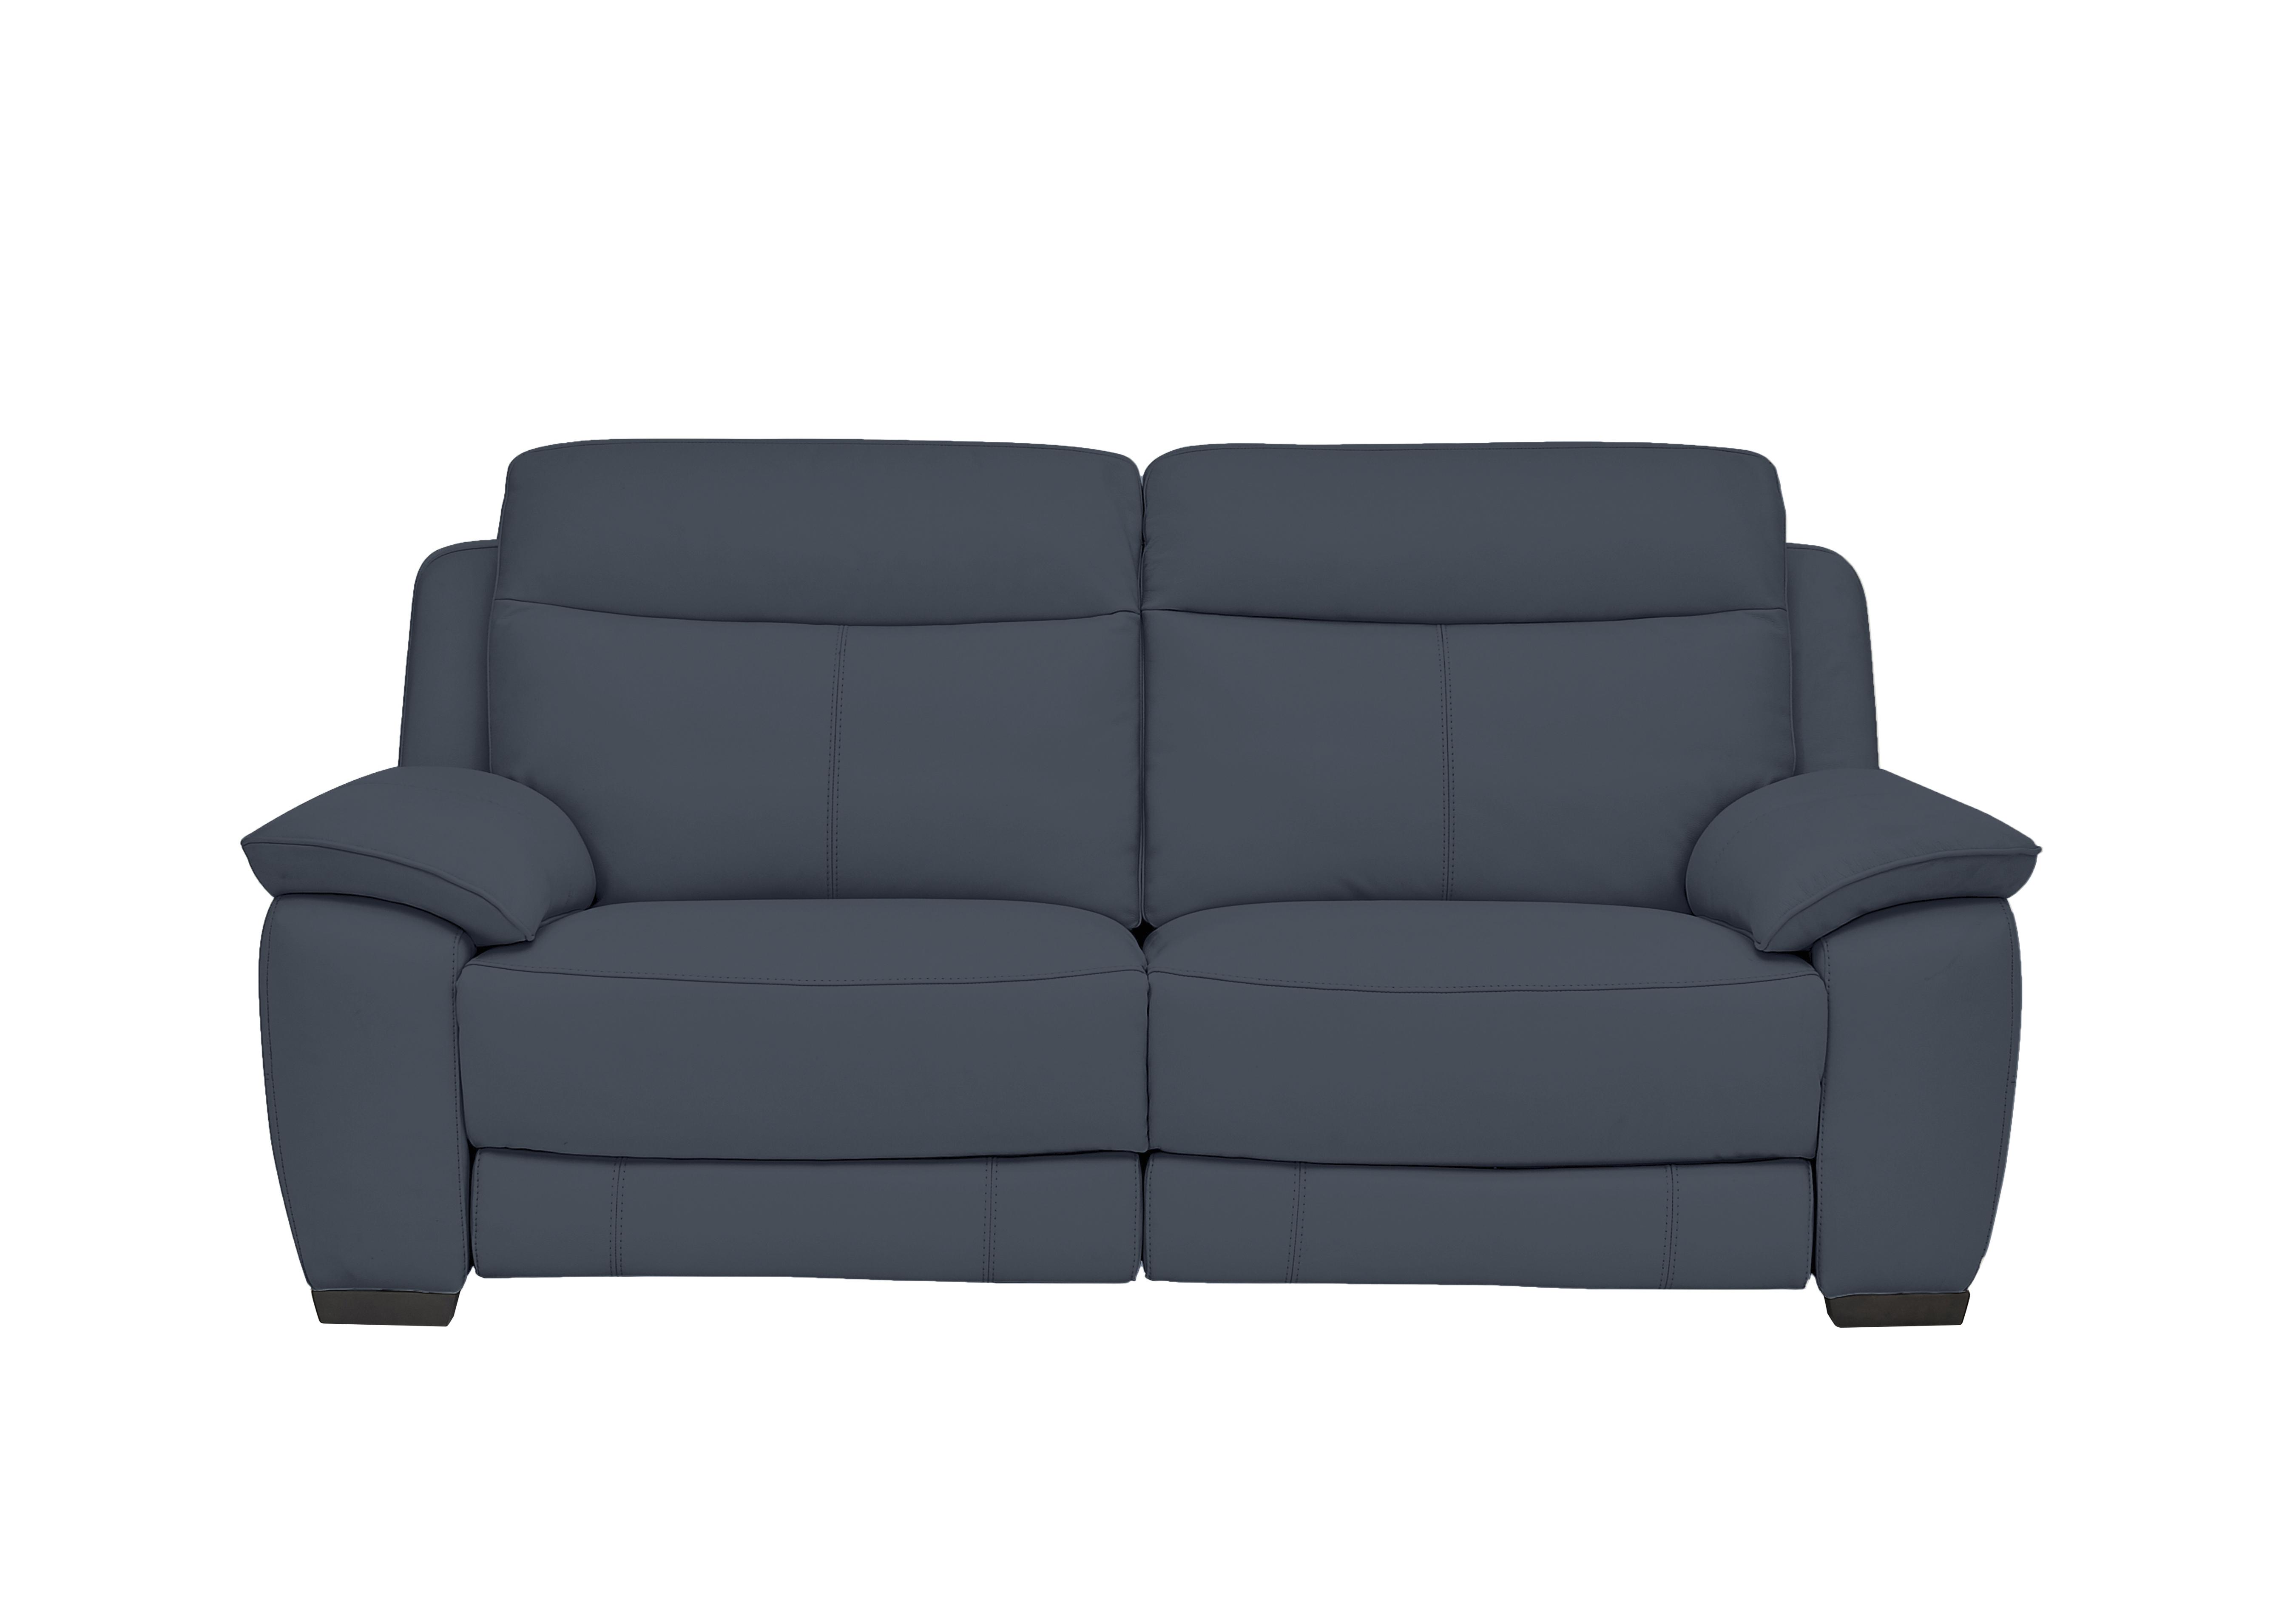 Starlight Express 3 Seater Leather Recliner Sofa with Power Headrests in Bv-313e Ocean Blue on Furniture Village